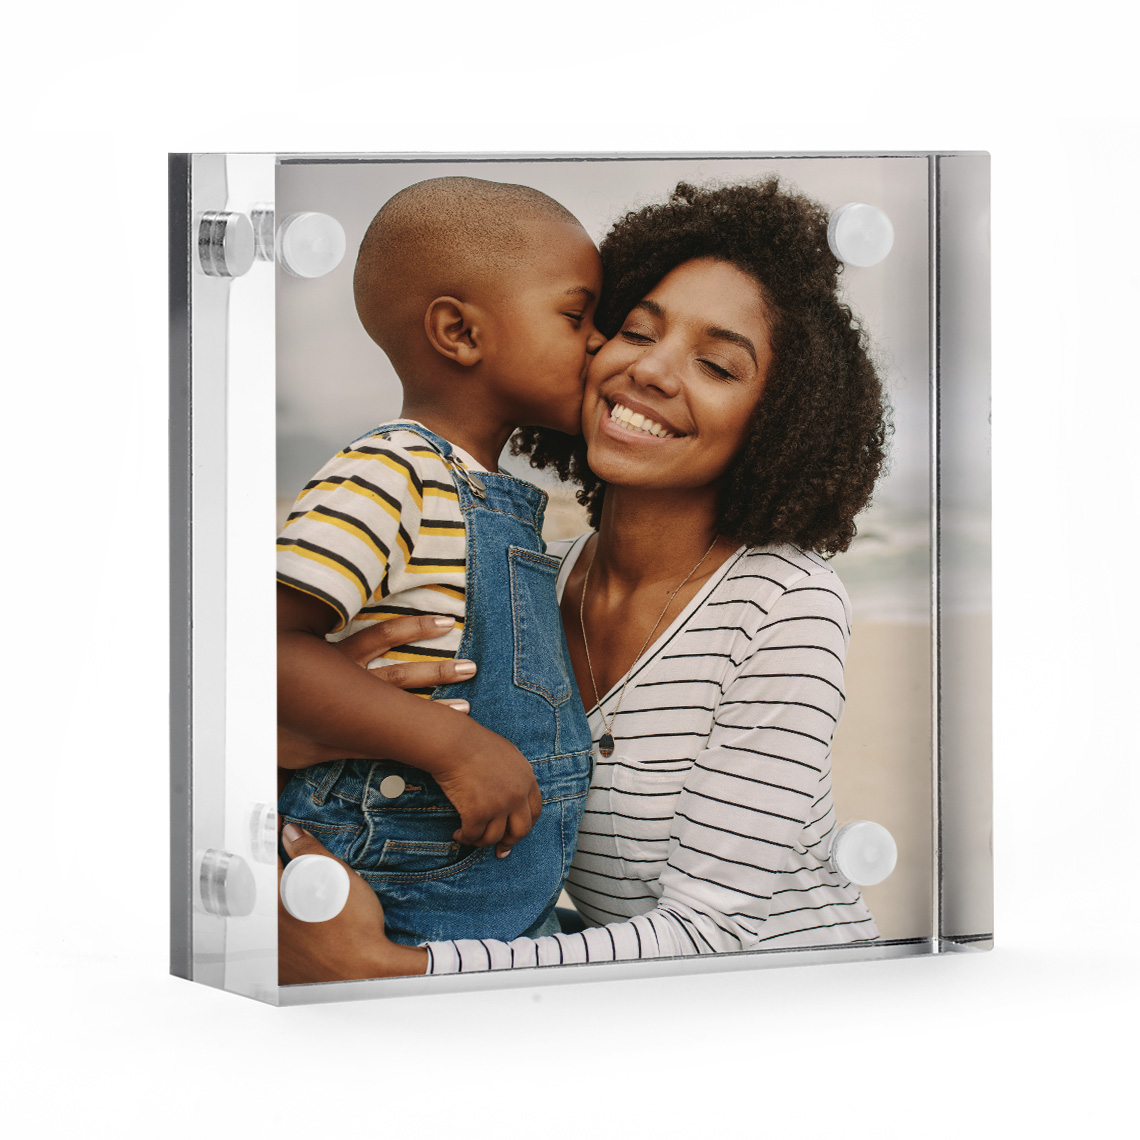  CanvasVilla Custom Photo Magnets, Picture Frames for